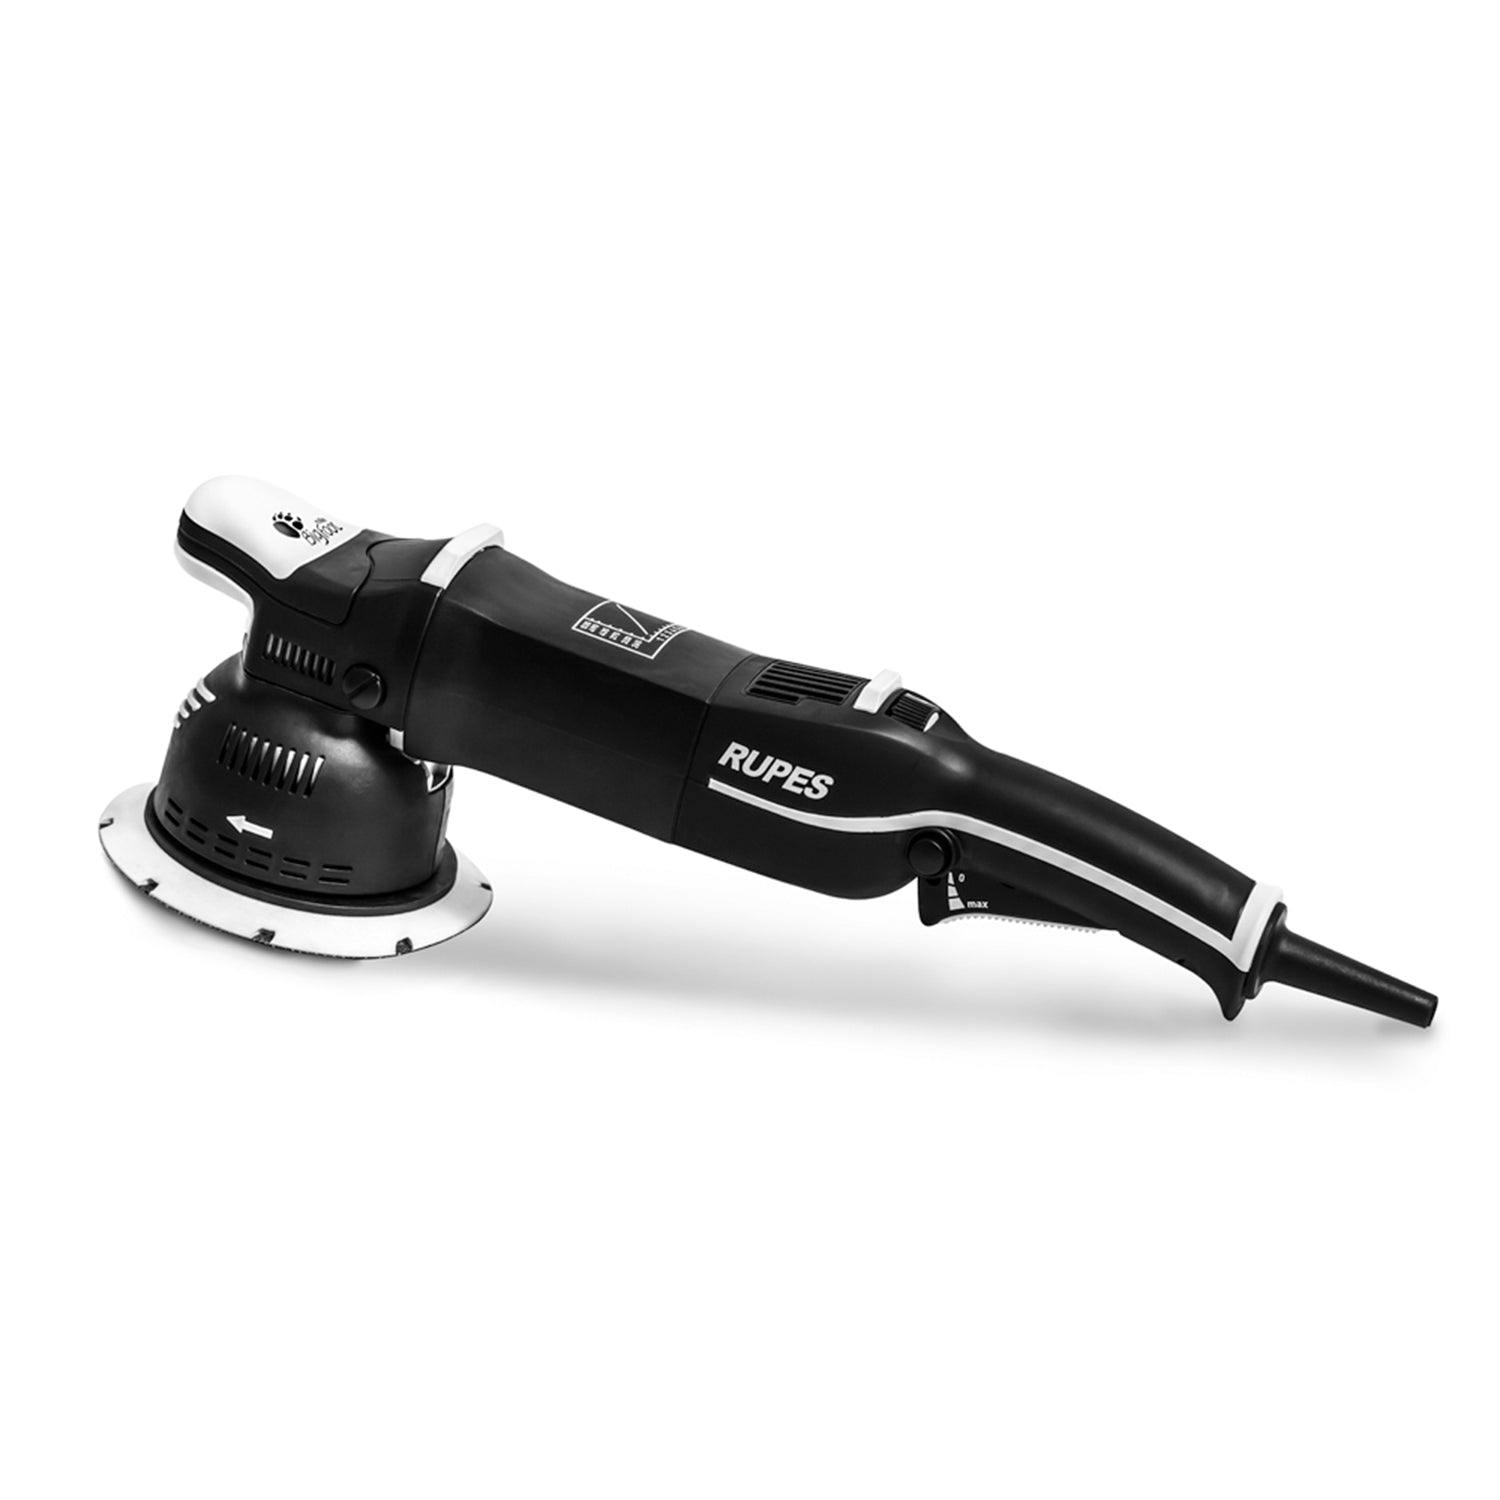 lk900e-mille-gear-driven-orbital-polisher-5-and-6-inch-backing-plates